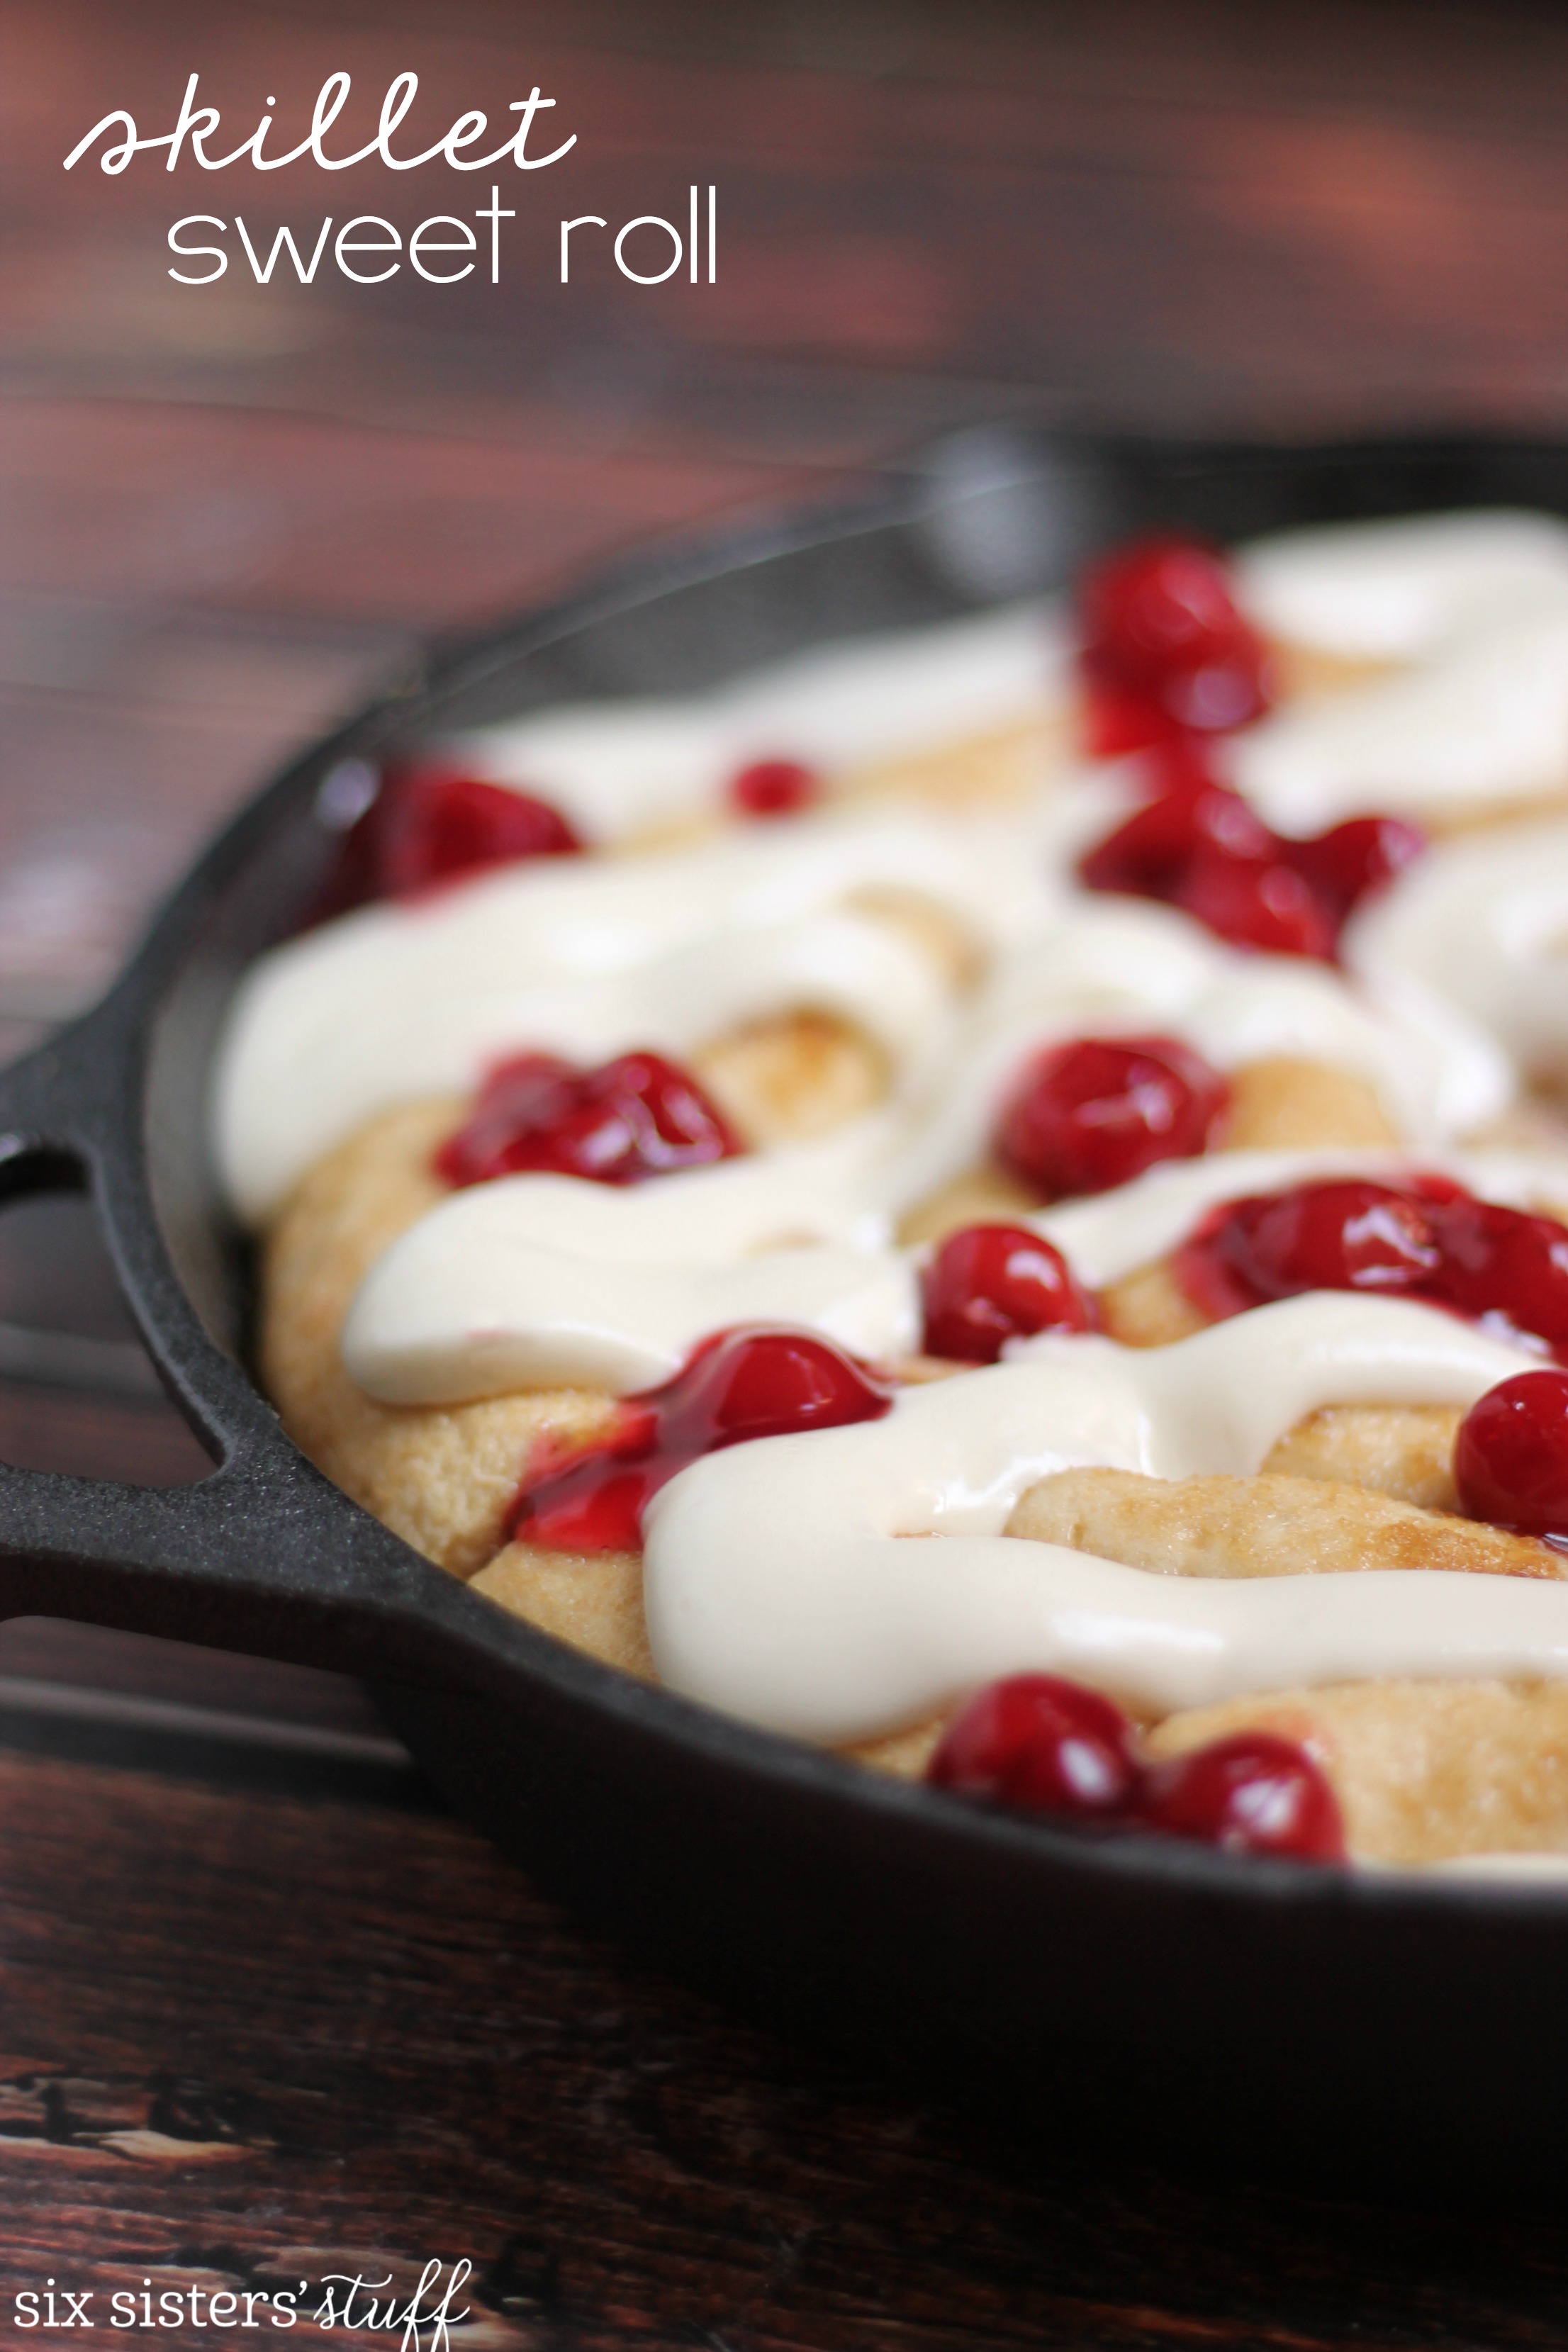 Lucky Leaf Skillet Sweet Roll